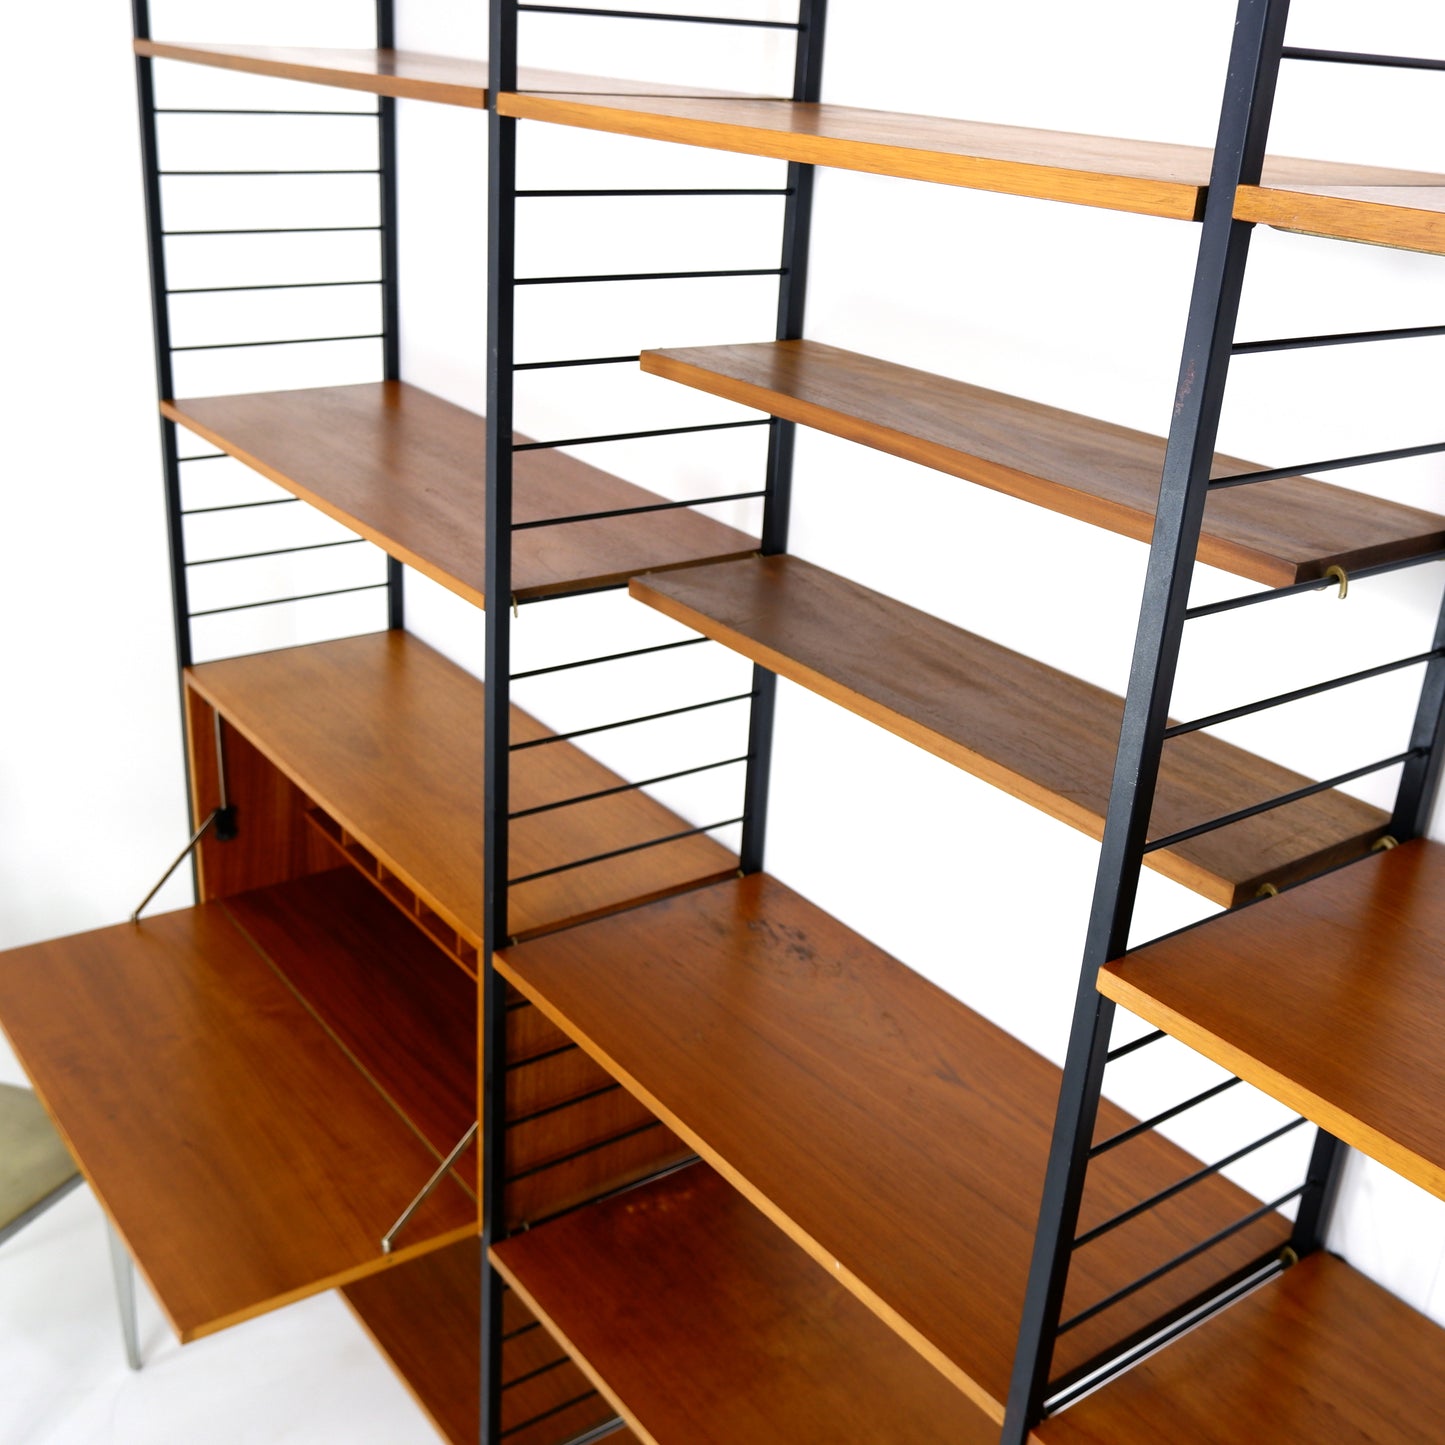 Ladderax Shelving System 3 Bays with Desk, Cocktail/Drinks Cabinet & Bookcases - Staples